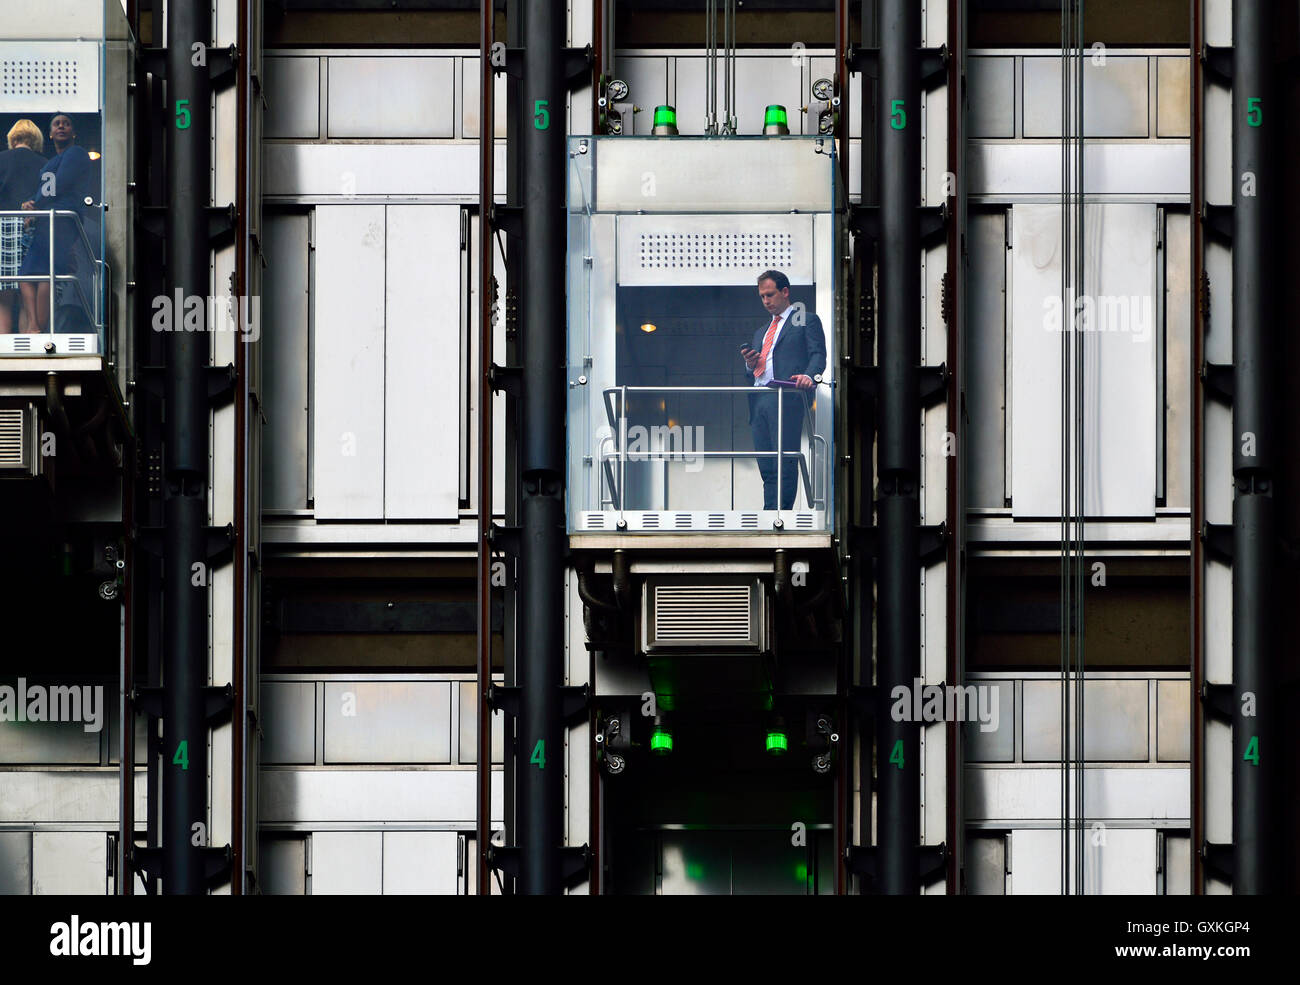 London, England, UK. Glass lifts in Lloyd's Insurance building in the City. Stock Photo